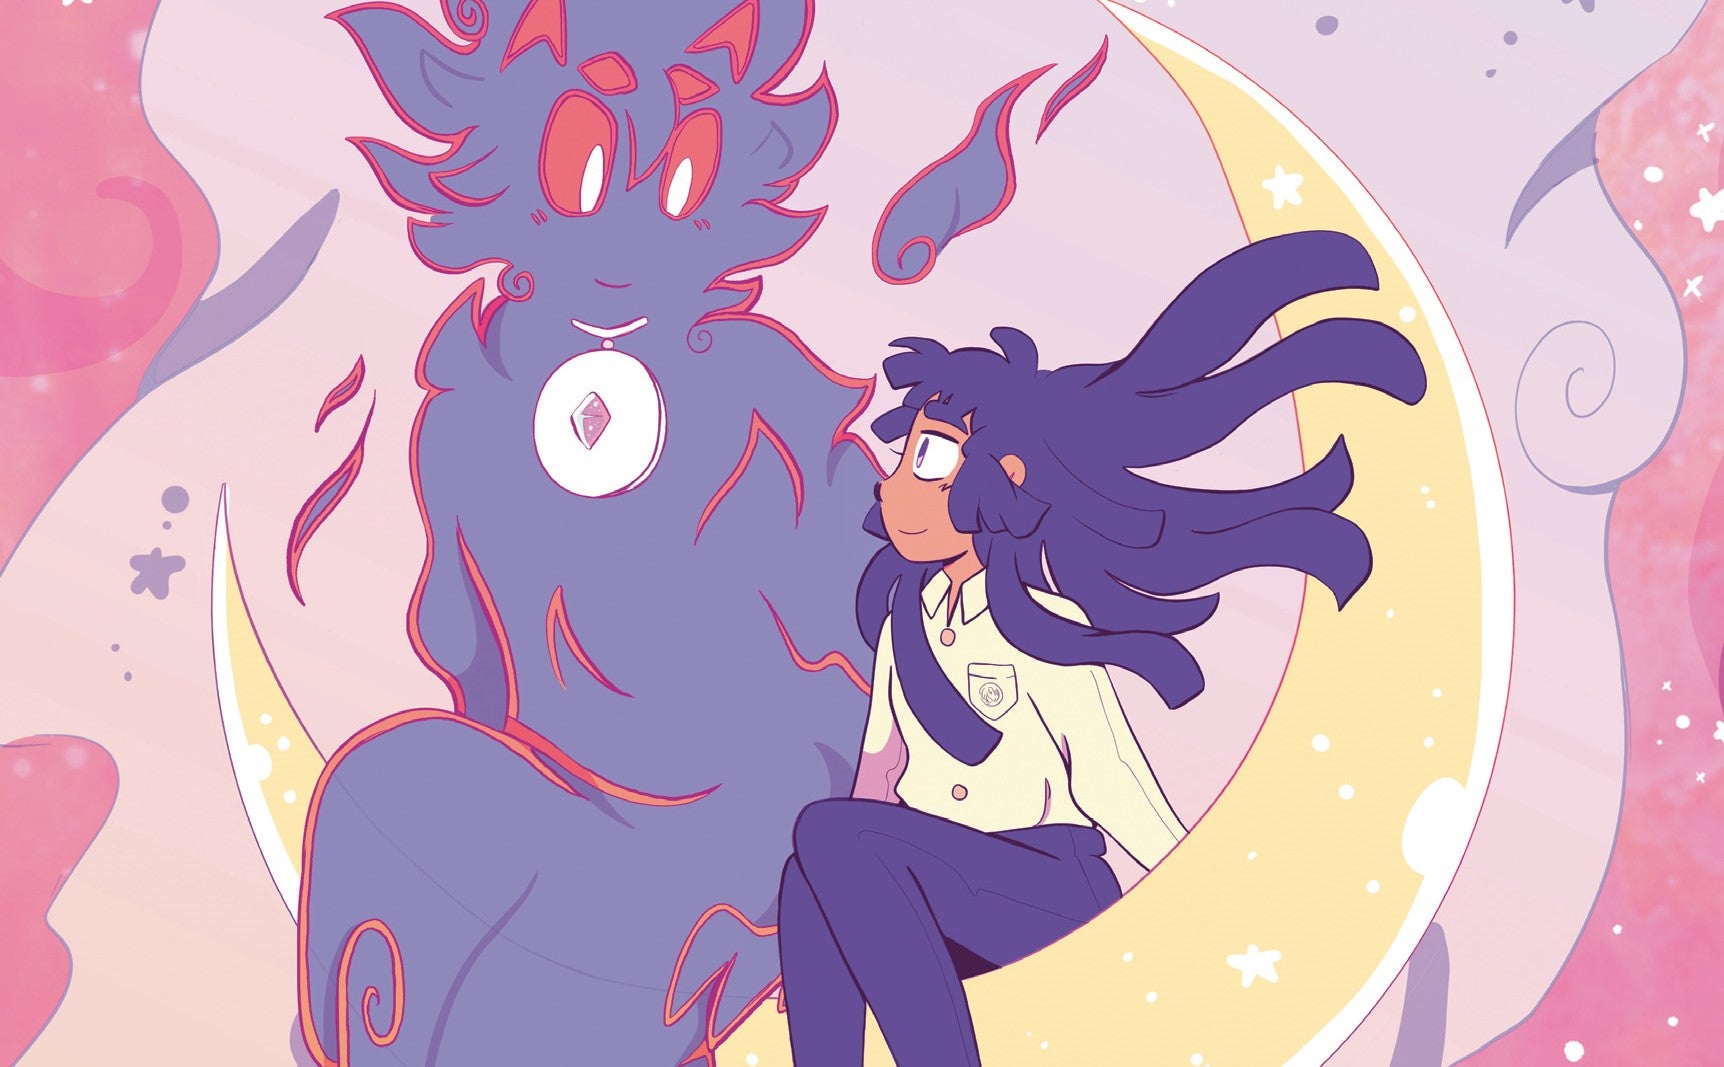 Pastel toned illustration of a girl and a large purple djinn sitting on a crescent moon, smiling at each other